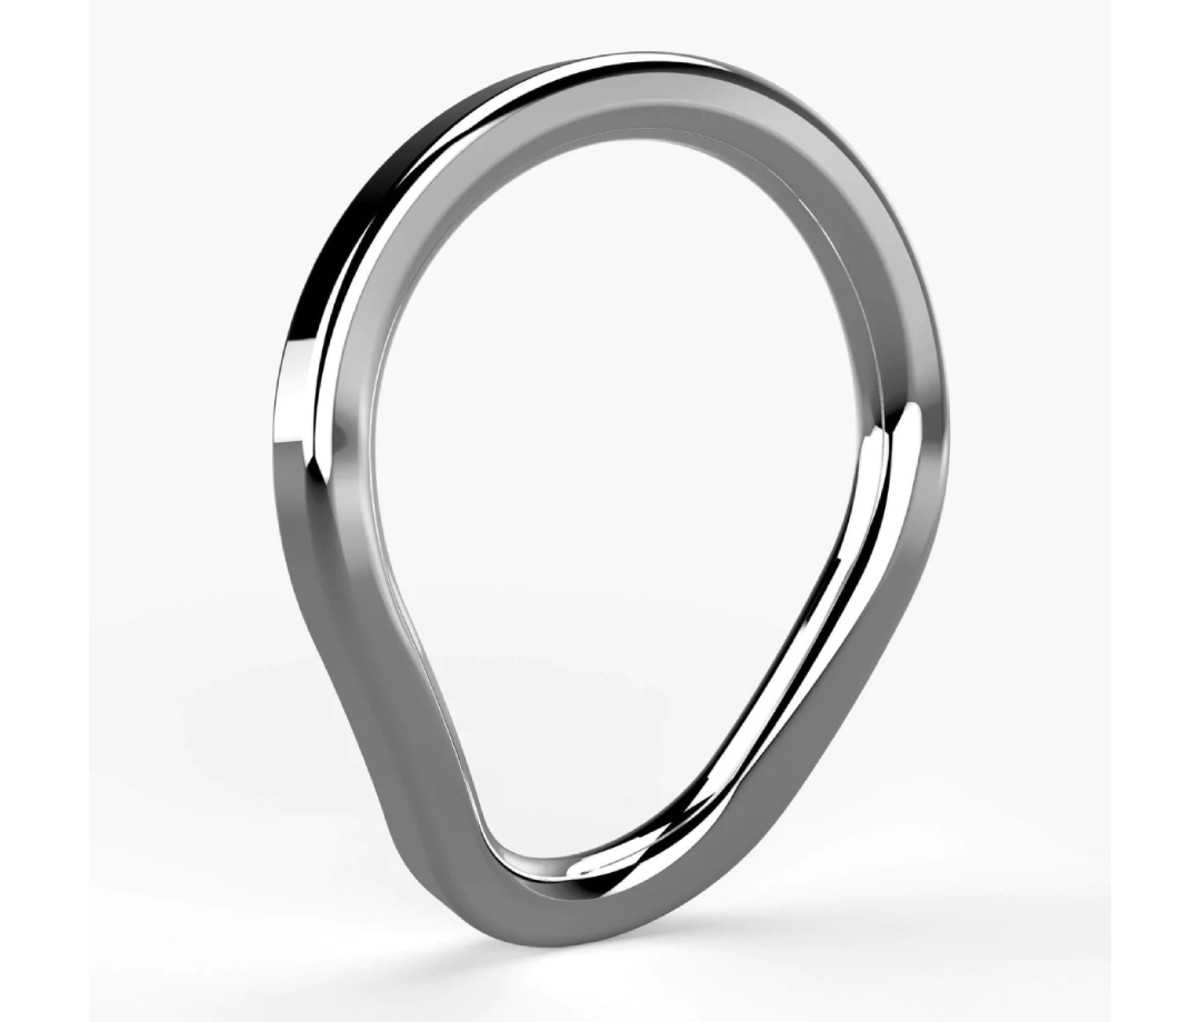 23 Best Cock Rings for Any Penis [Real Testing] 